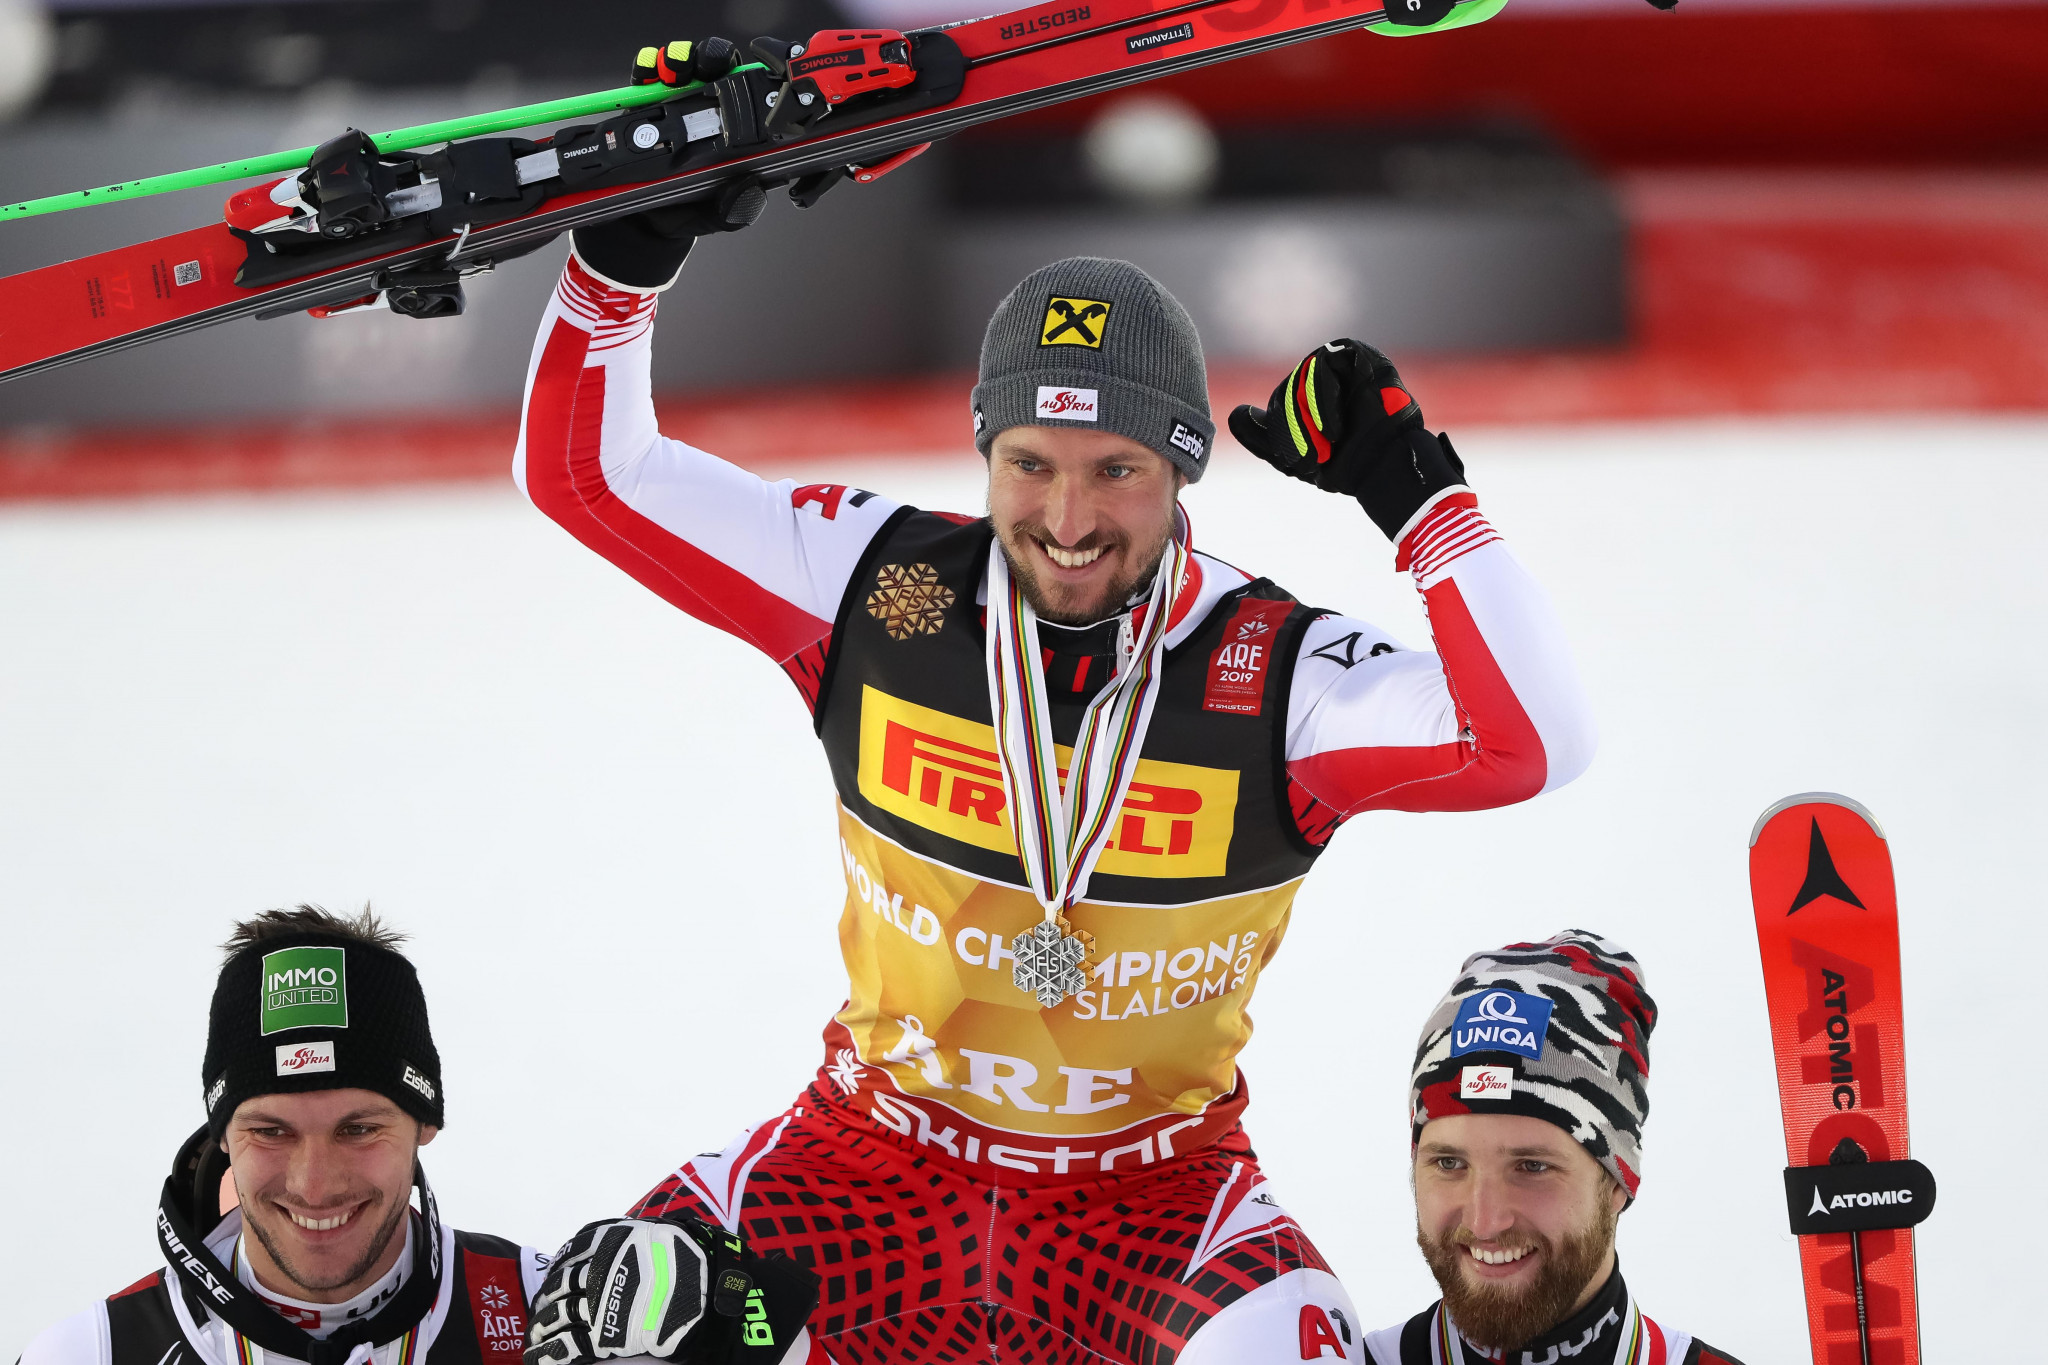 Marcel Hirscher won the men's slalom world title for the third time in his career ©Getty Images